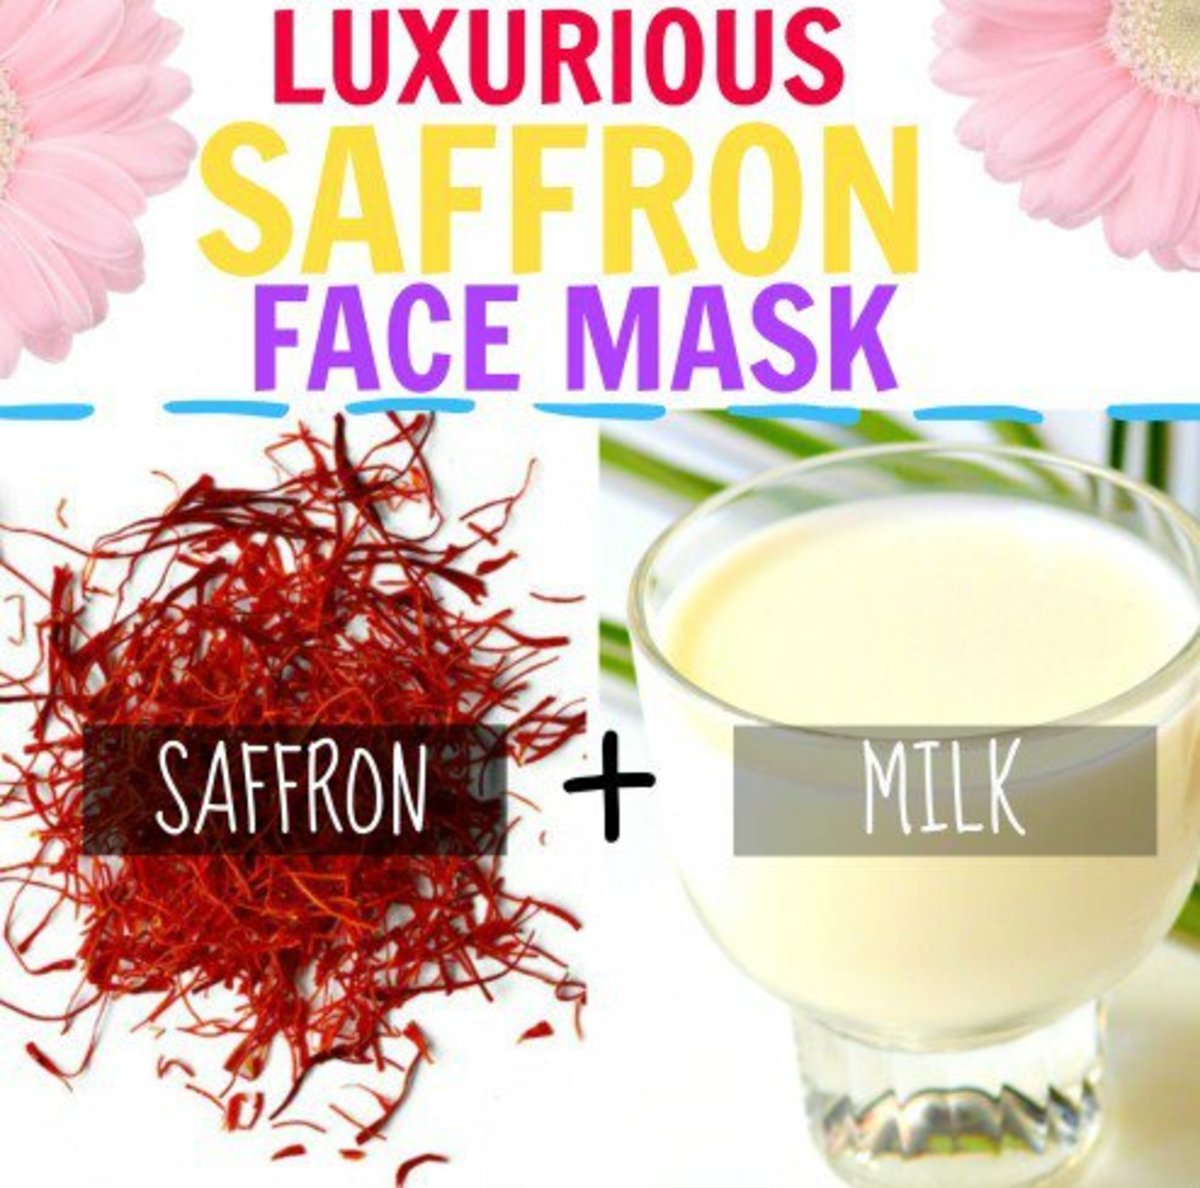 The most popular saffron face mask. Mix saffron in milk to form a golden mixture for bright skin 